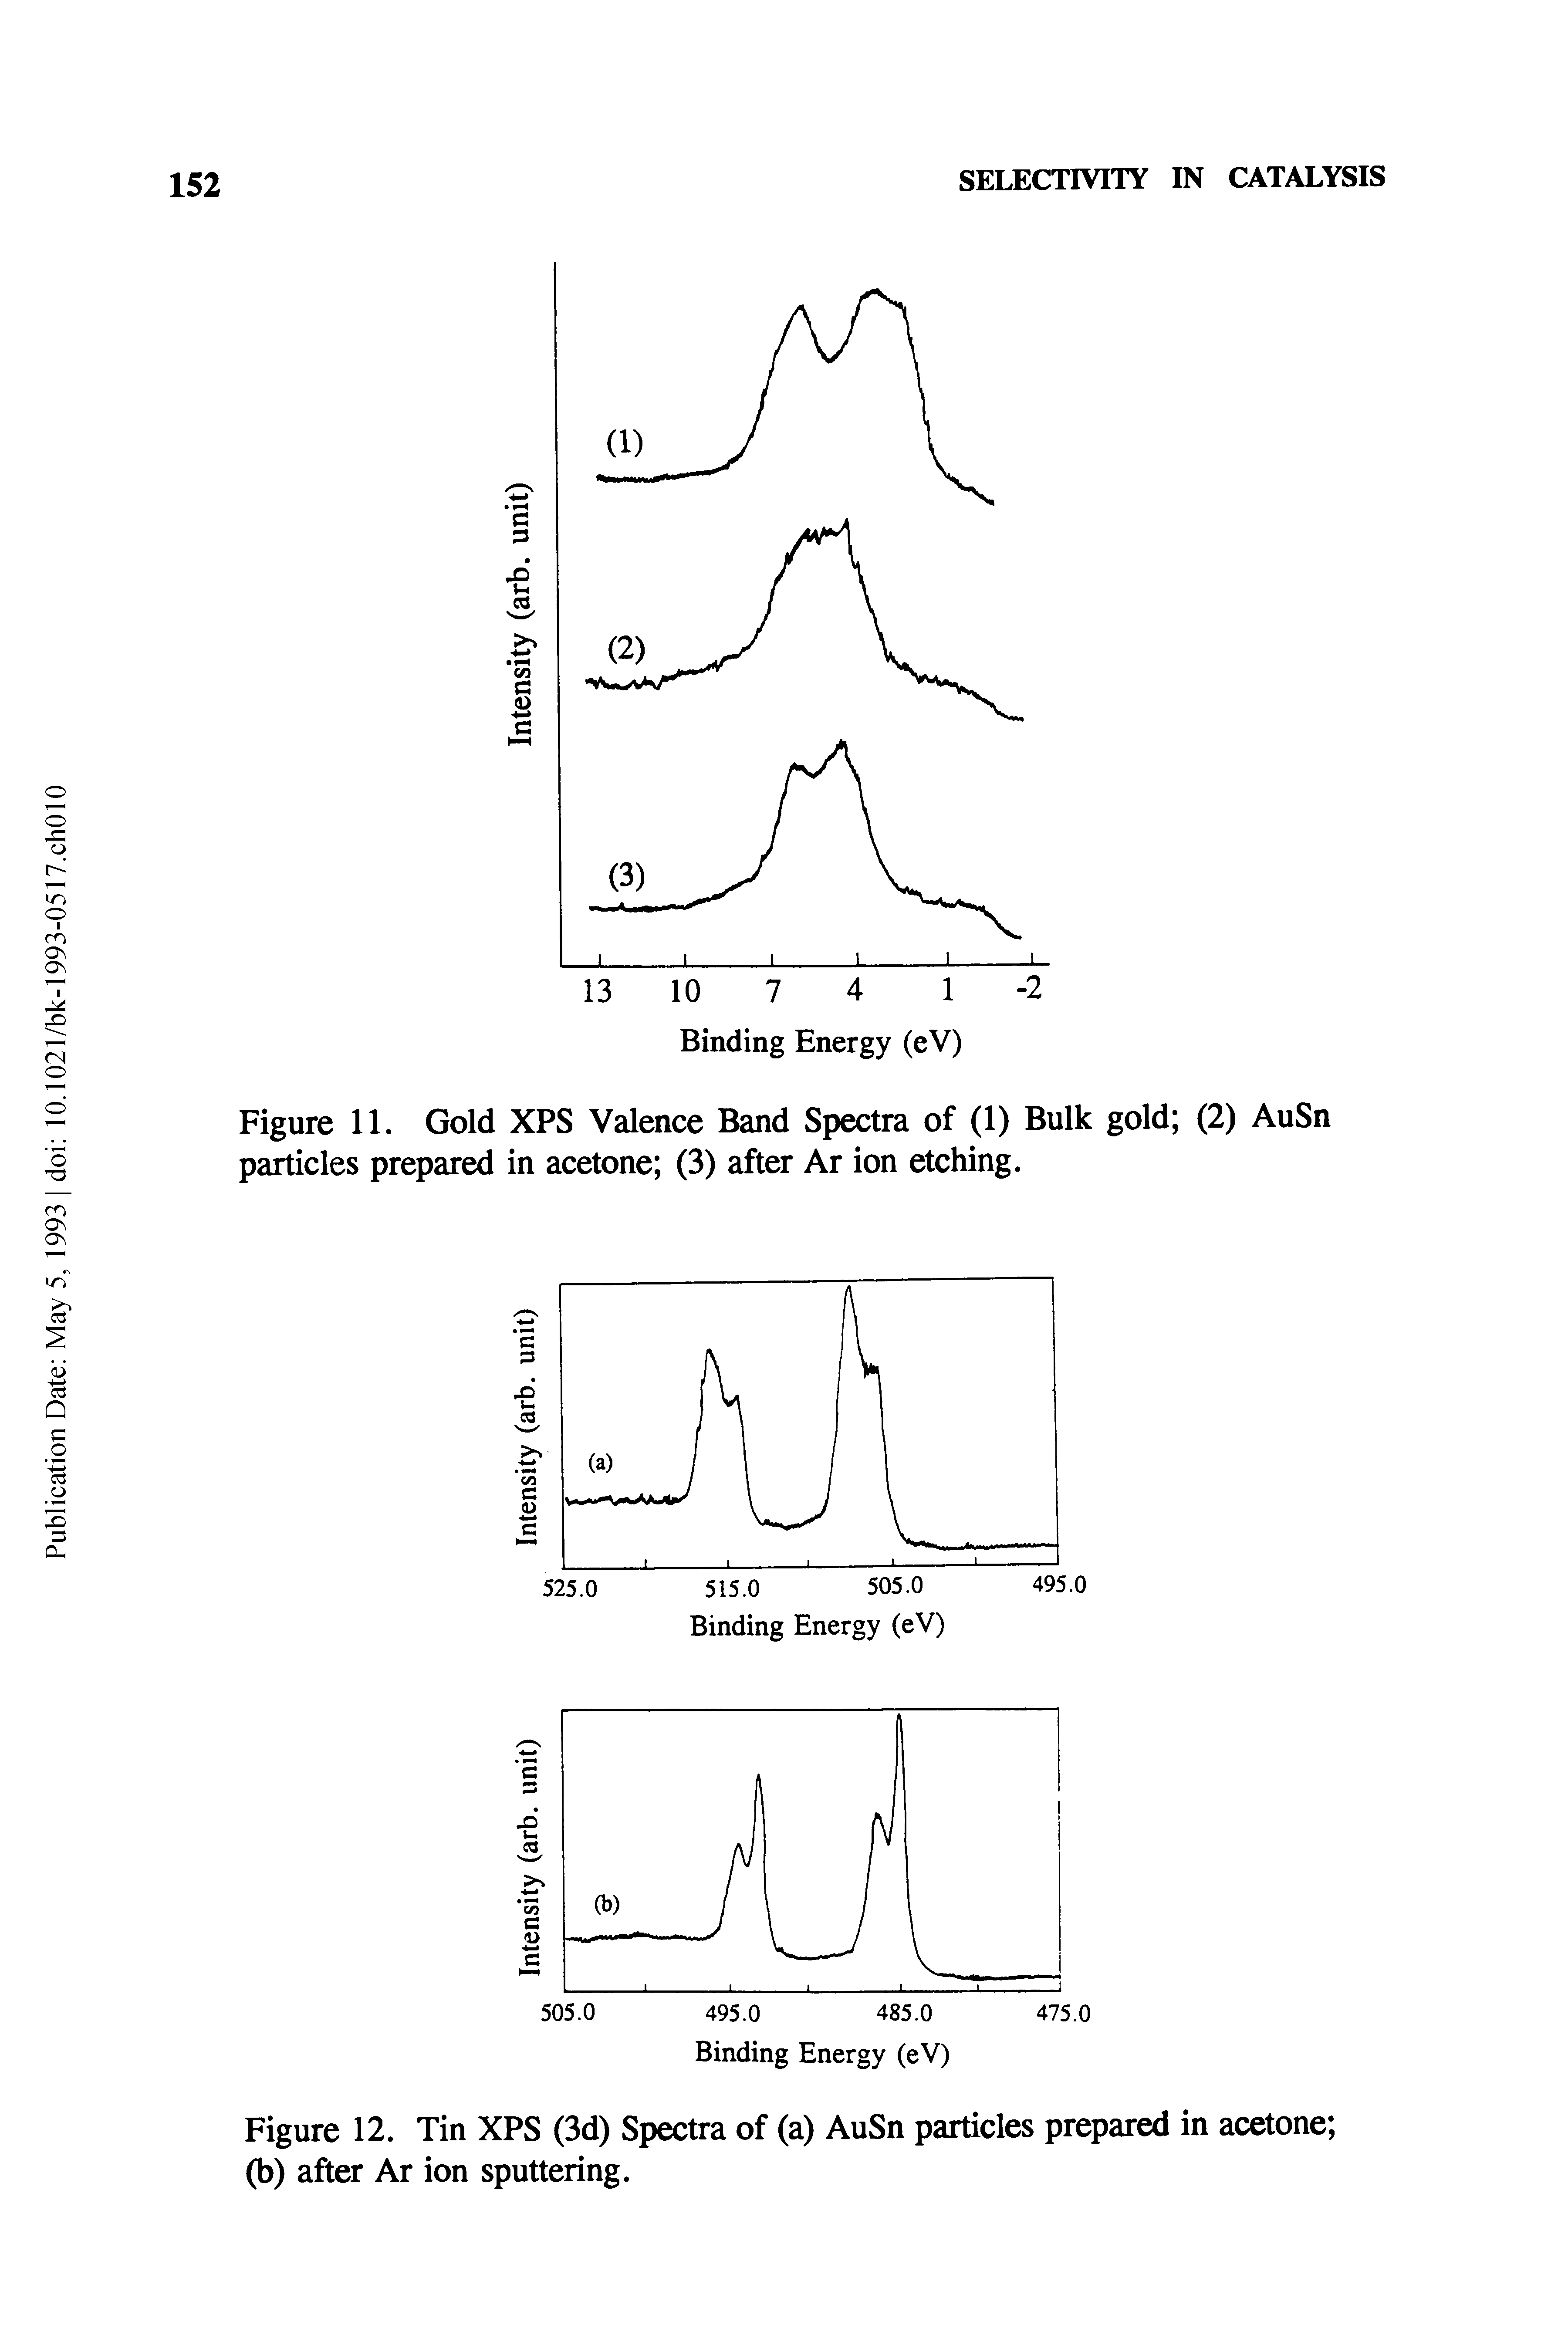 Figure 11. Gold XPS Valence Band Spectra of (1) Bulk gold (2) AuSn particles prepared in acetone (3) after Ar ion etching.